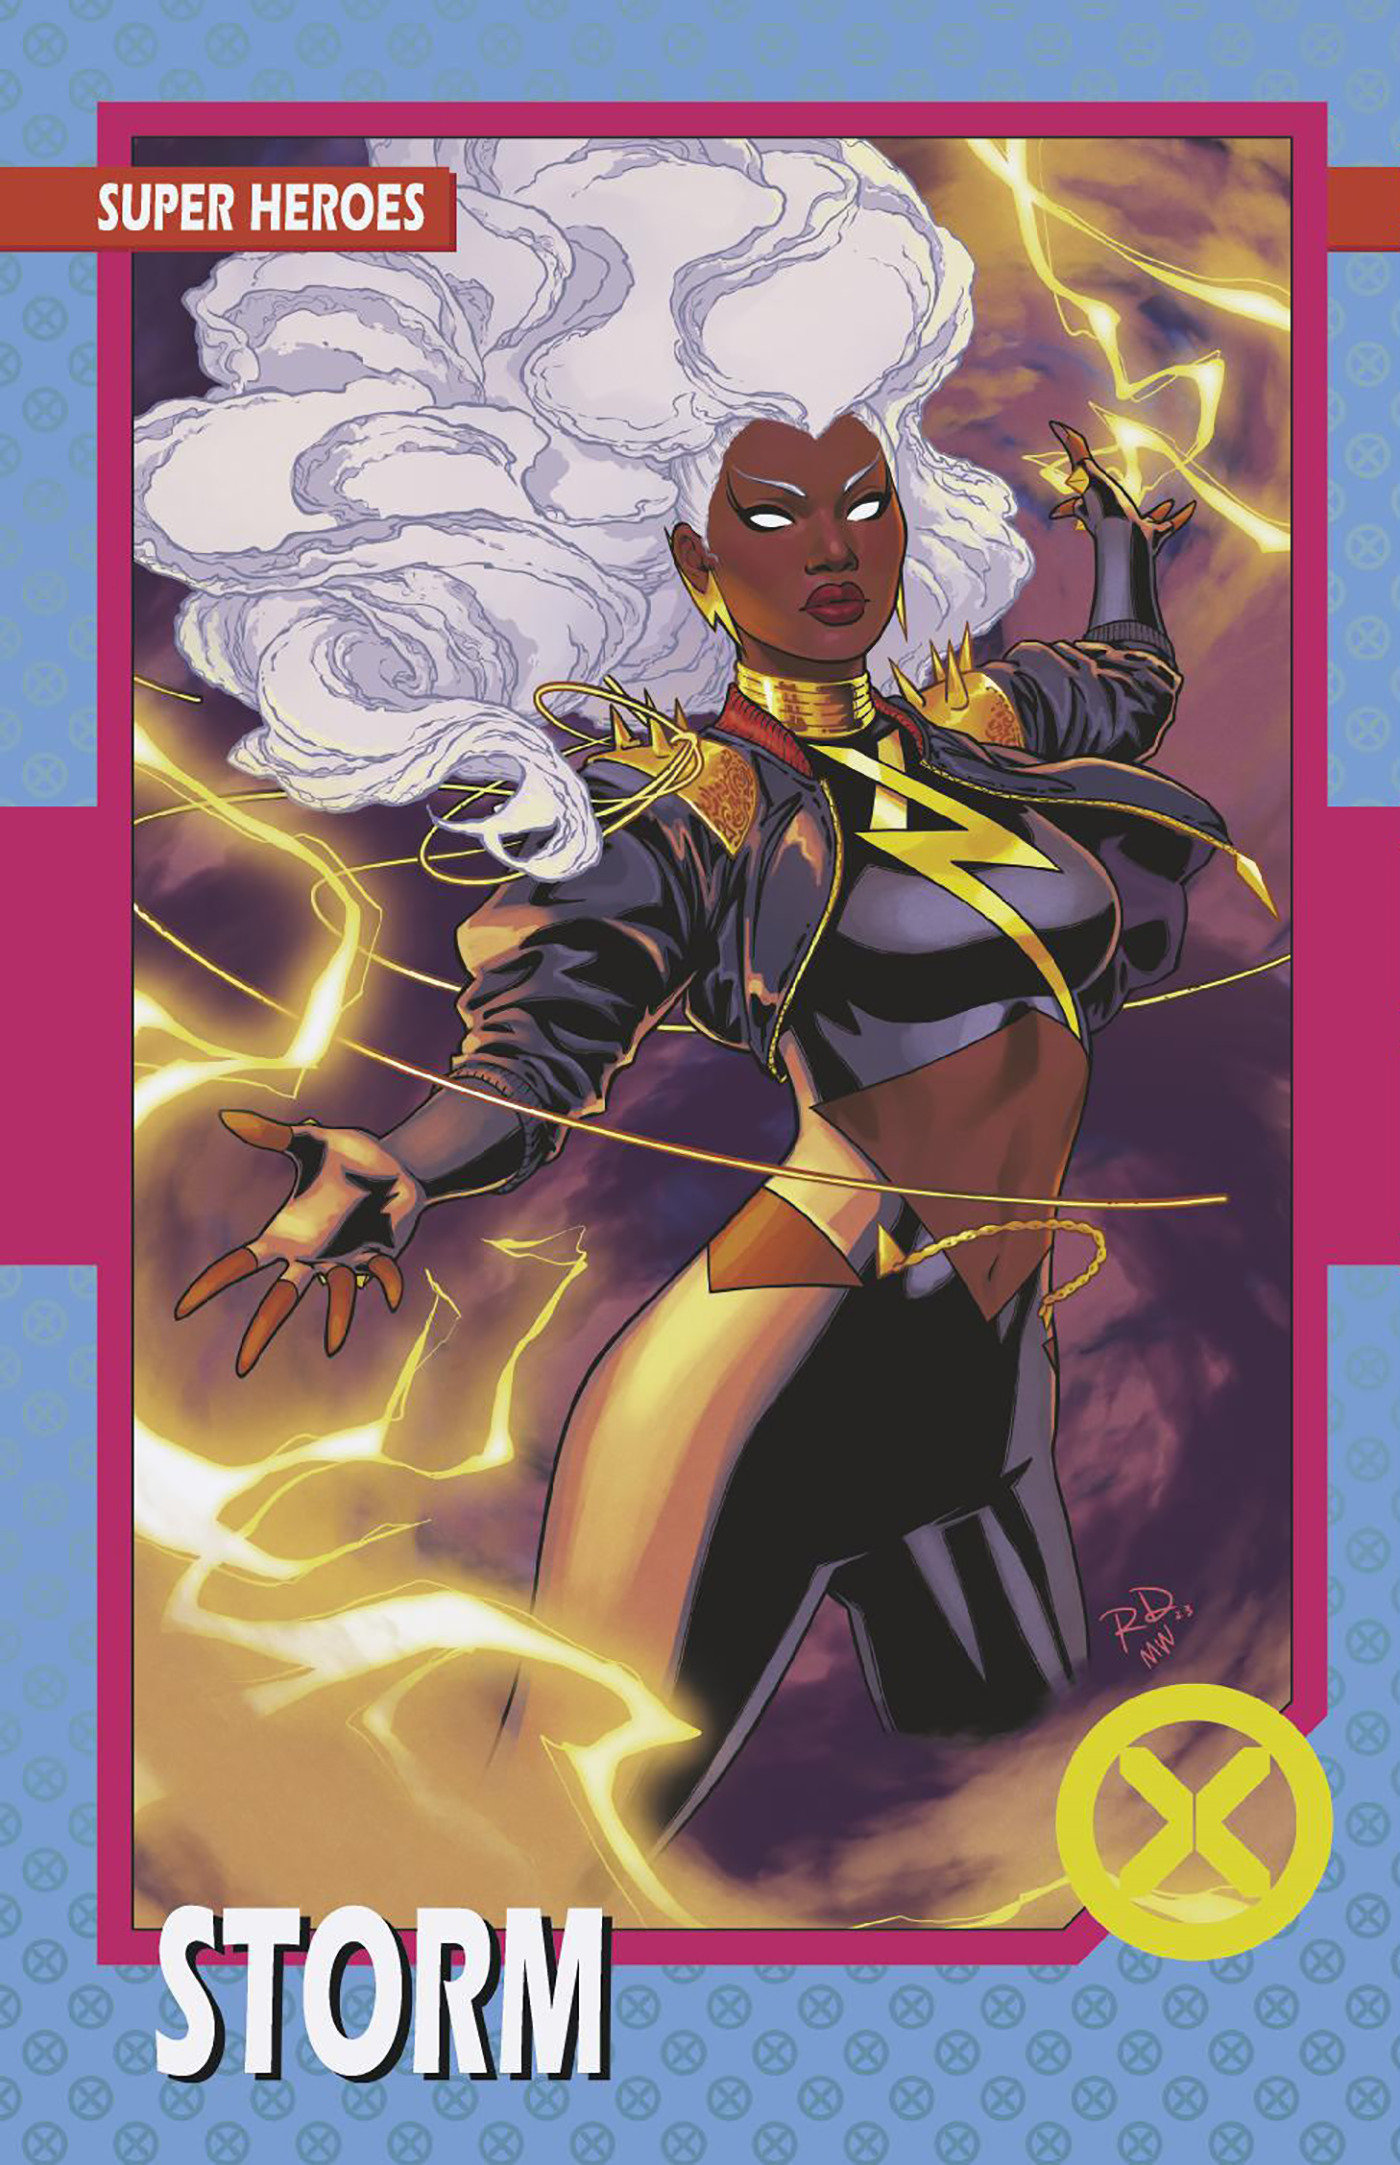 X-Men #33 Russell Dauterman Trading Card Variant (Fall of the House of X) (2021)